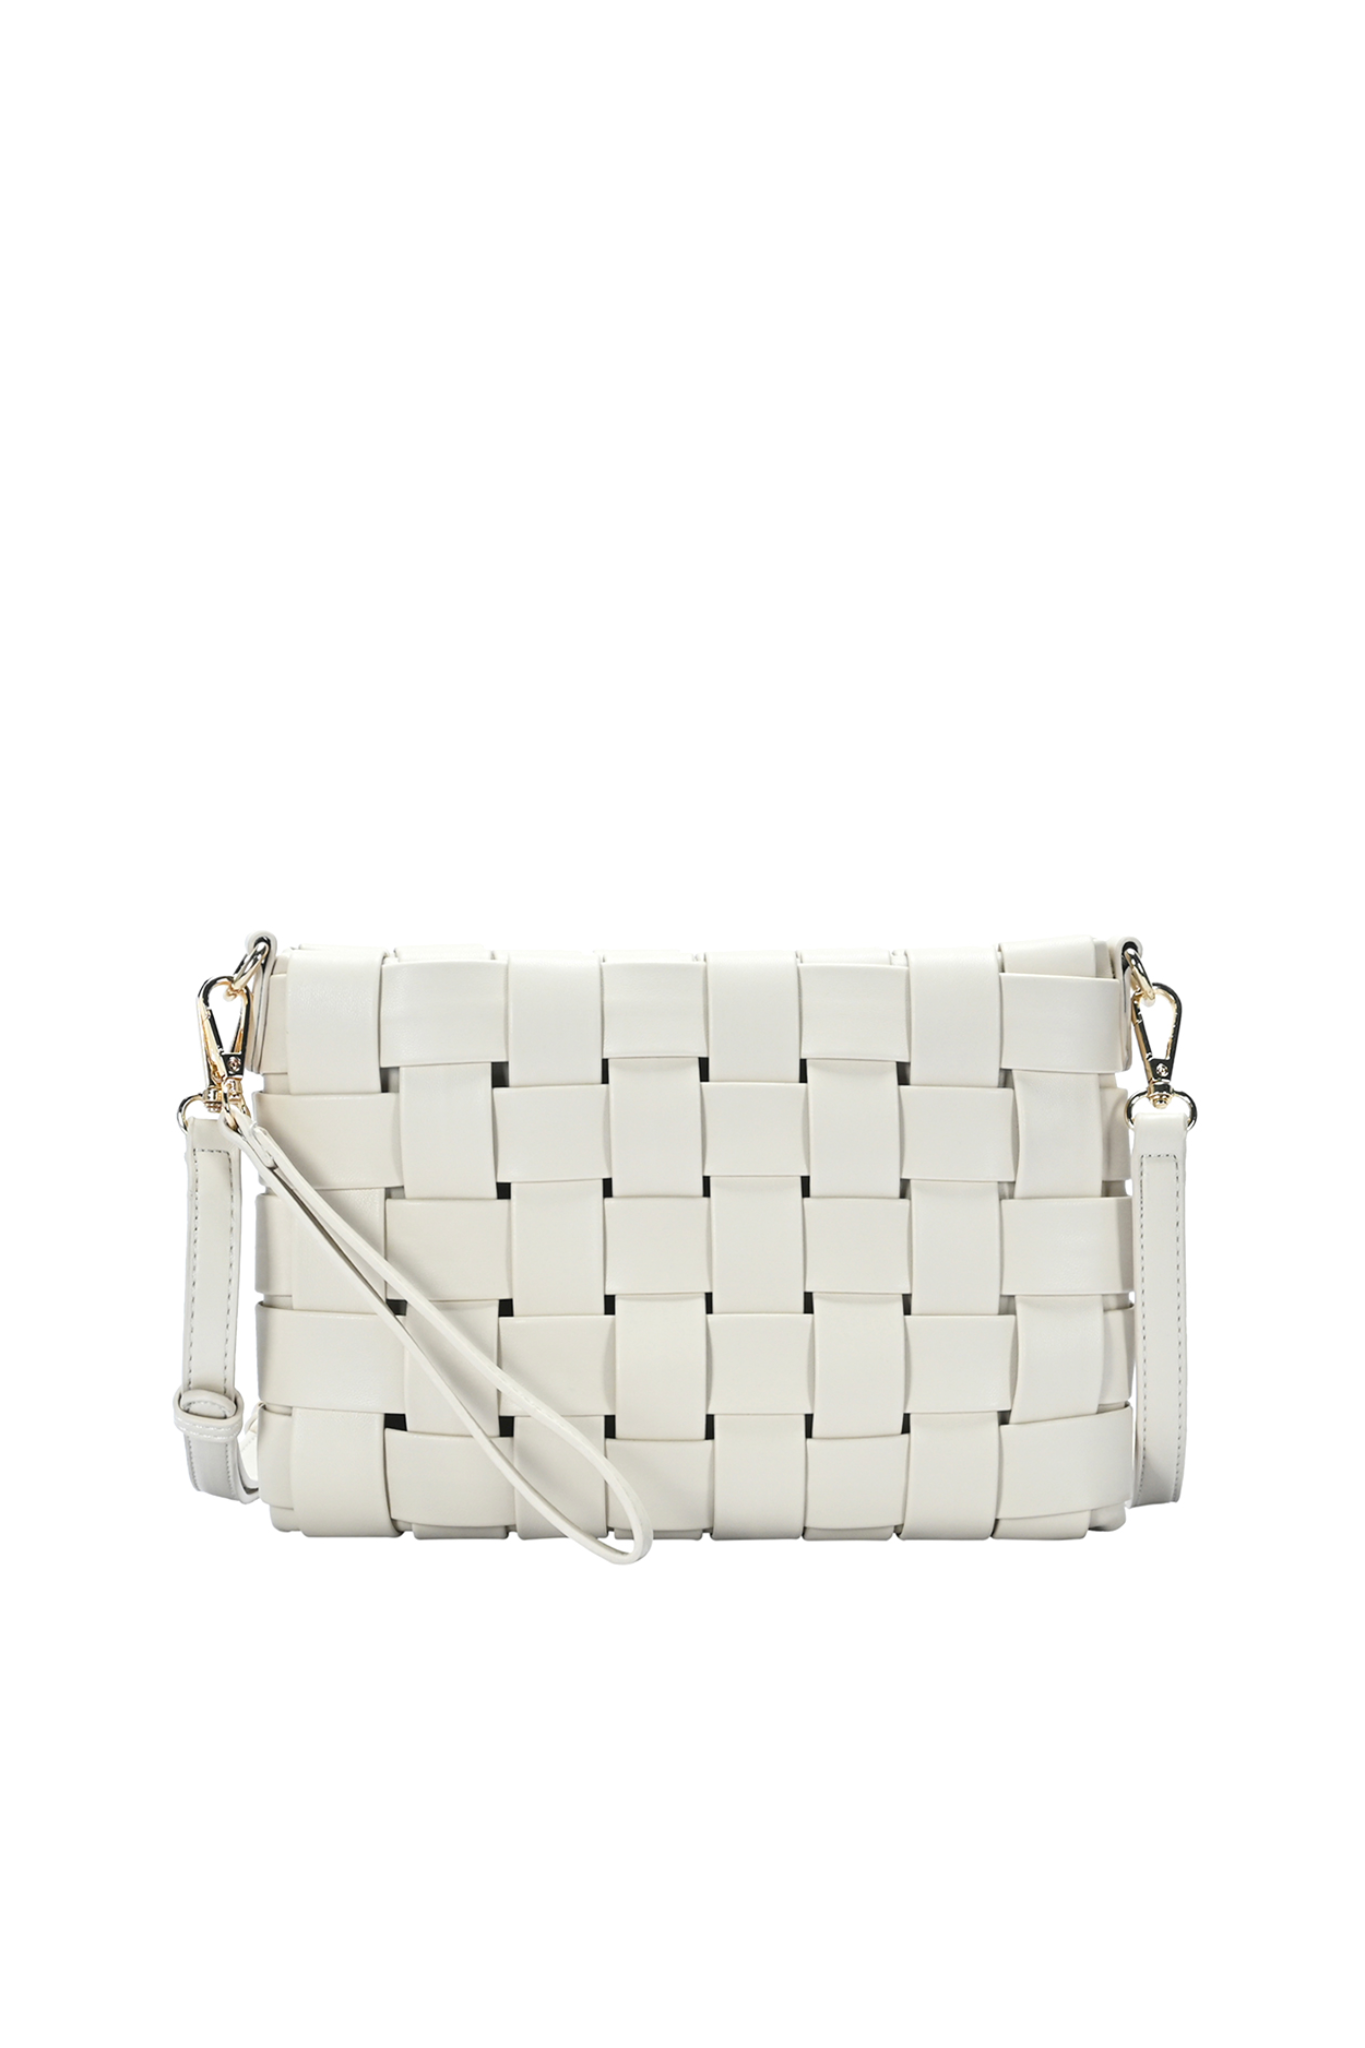 Rayin Hand Clutch and Crossbody Bag in Ivory